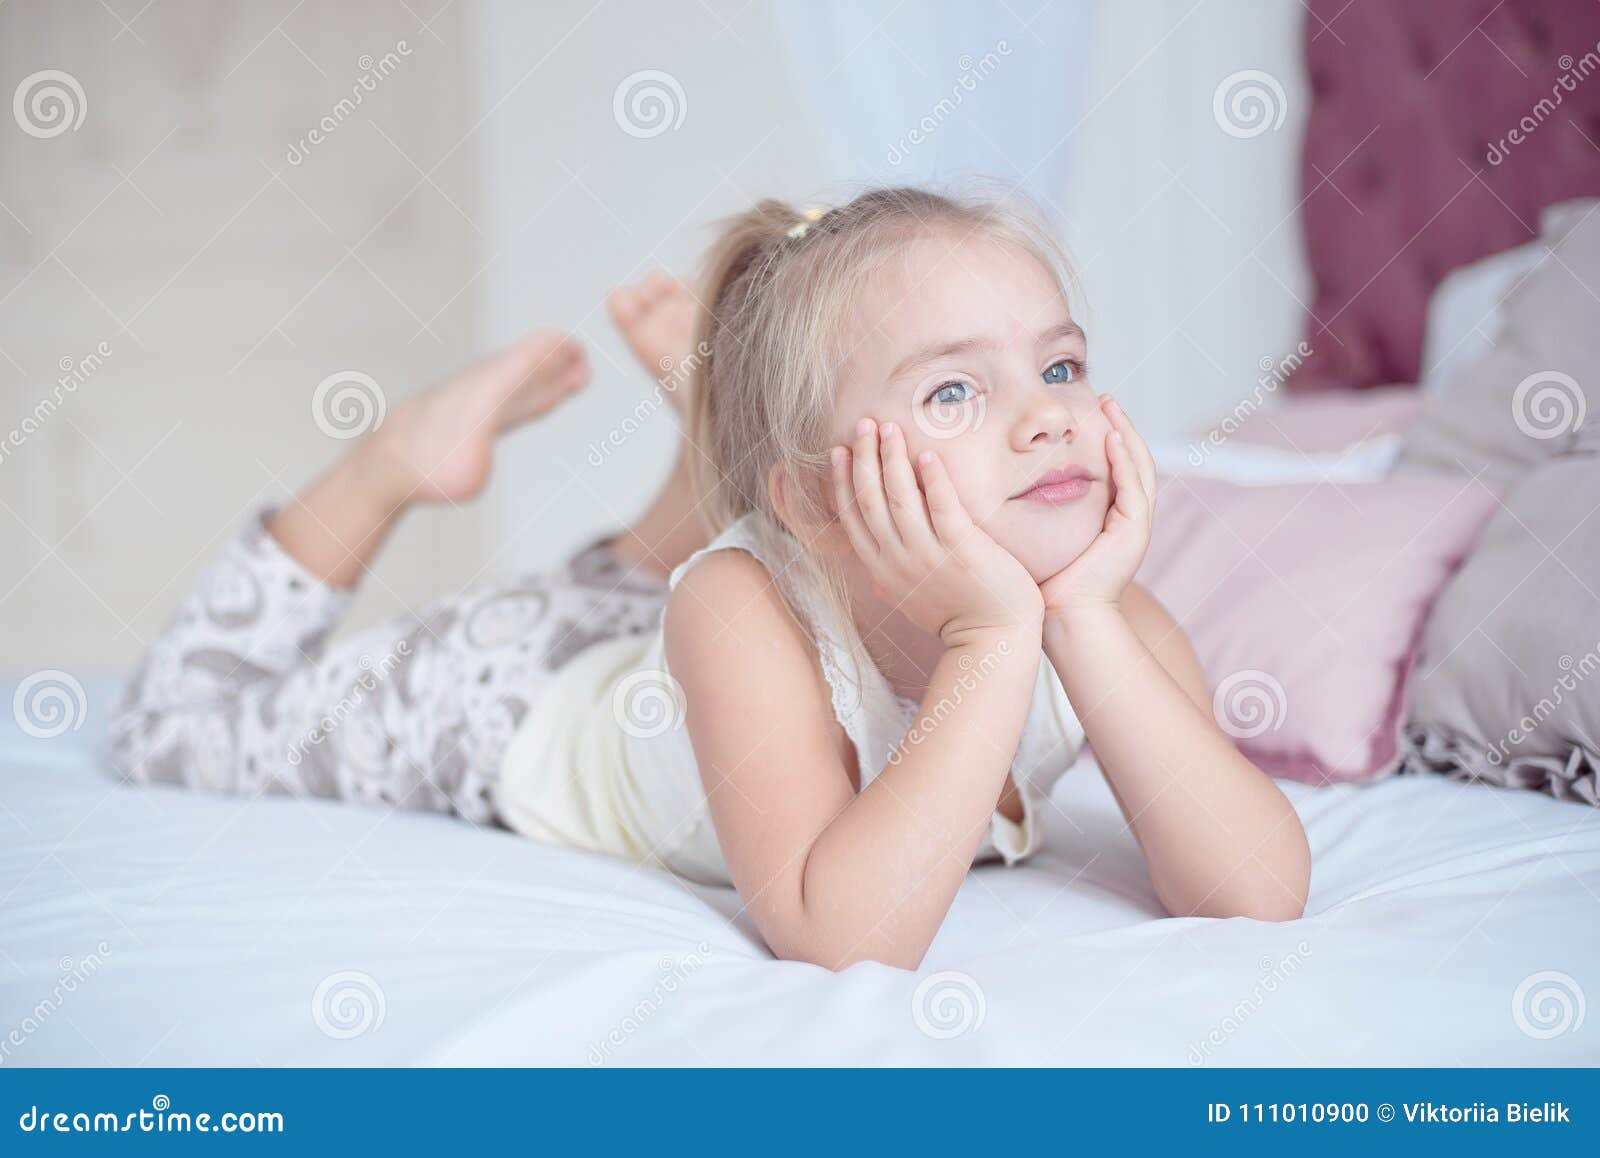 Cute Little Blond Girl Lying on Bed Stock Photo - Image of little ...